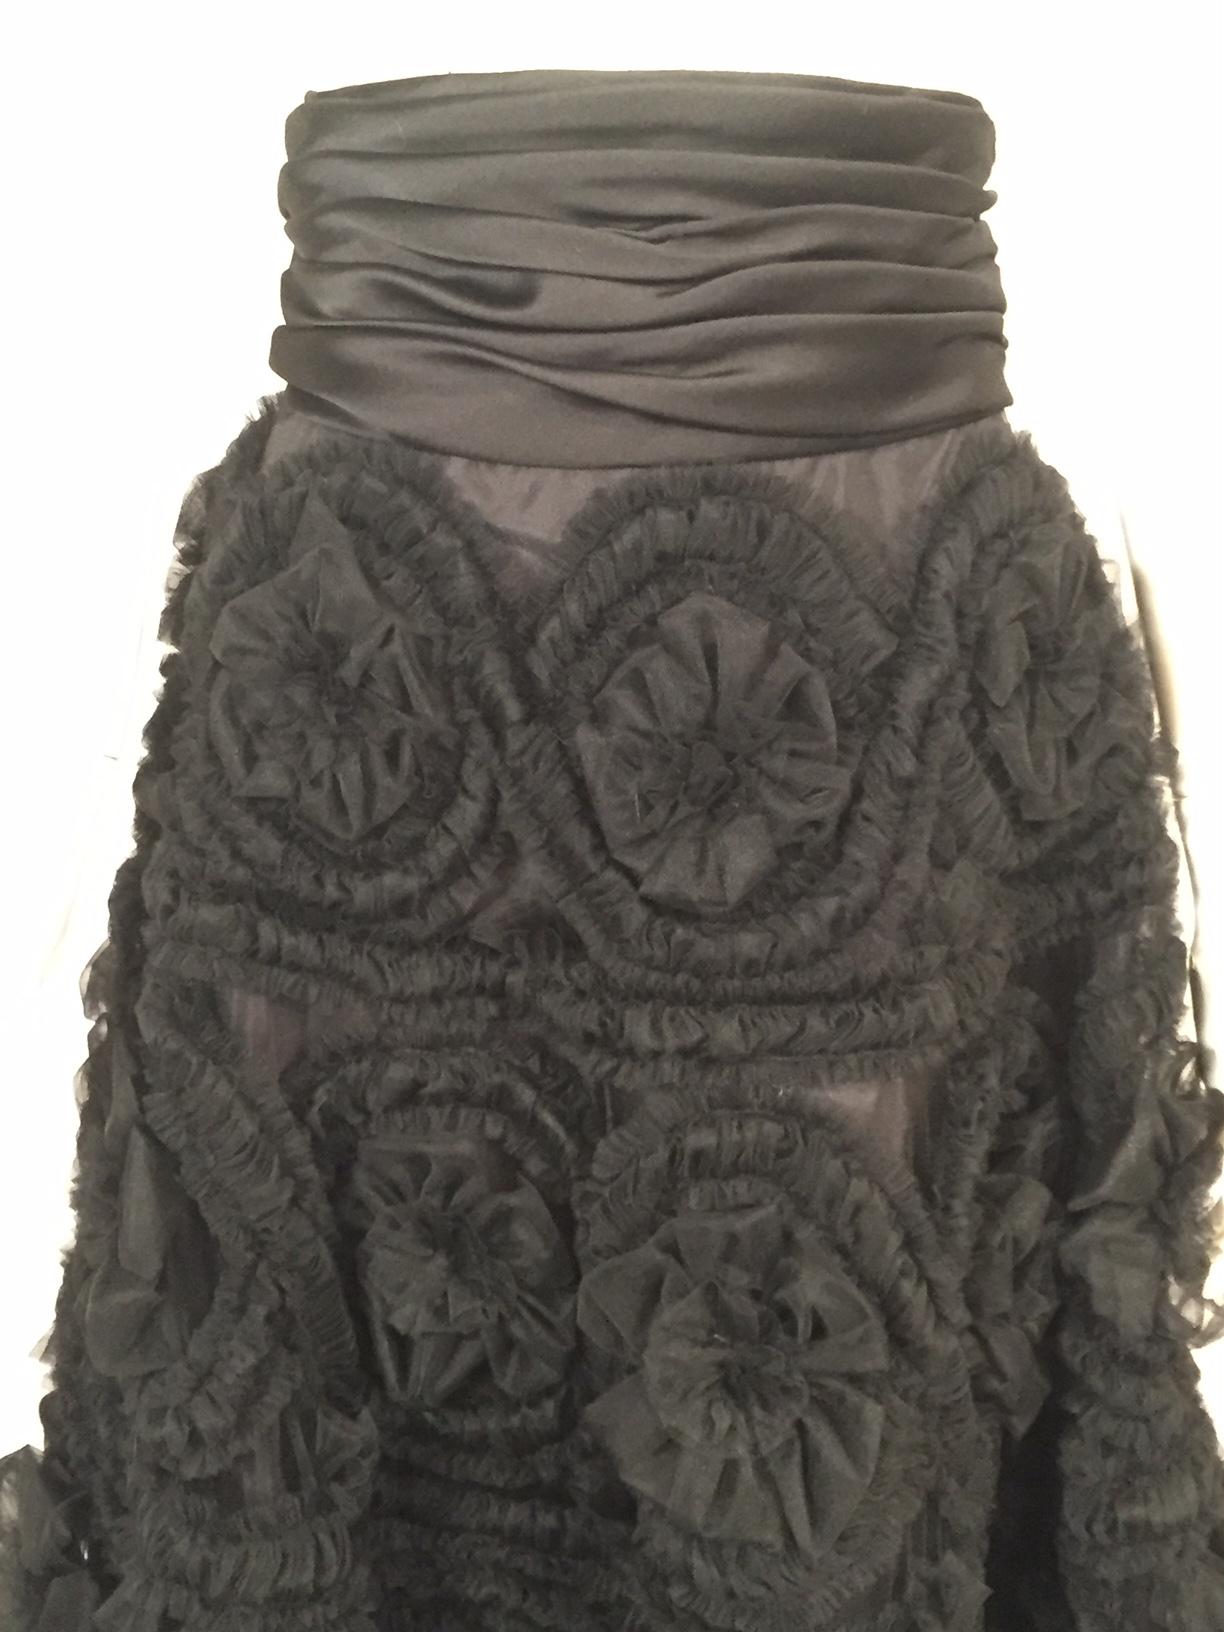 This is a delightful evening skirt made from a layer of black net. The net is completely covered with rows of gathered tulle which encircles the three dimensional tulle flowers. The flowers are graduated in size, starting at 3 1/2